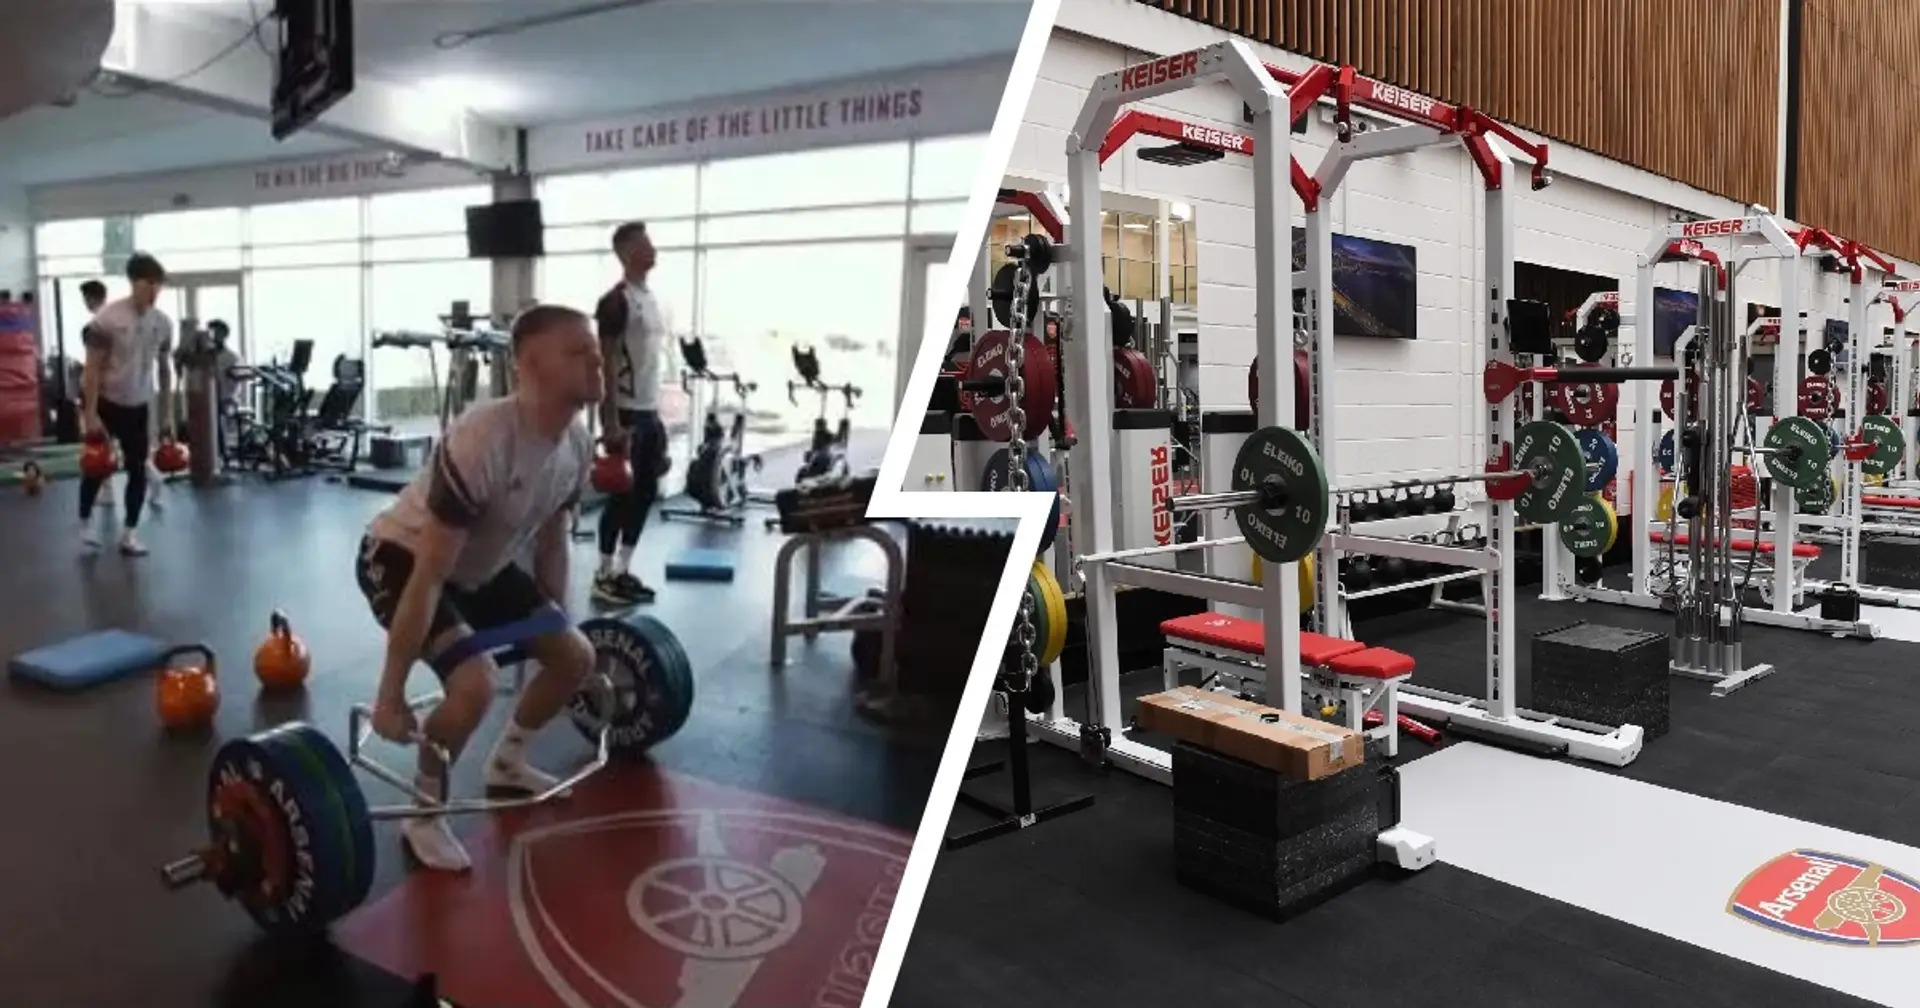 Arsenal player who doesn't like gym work named - he's one of the strongest